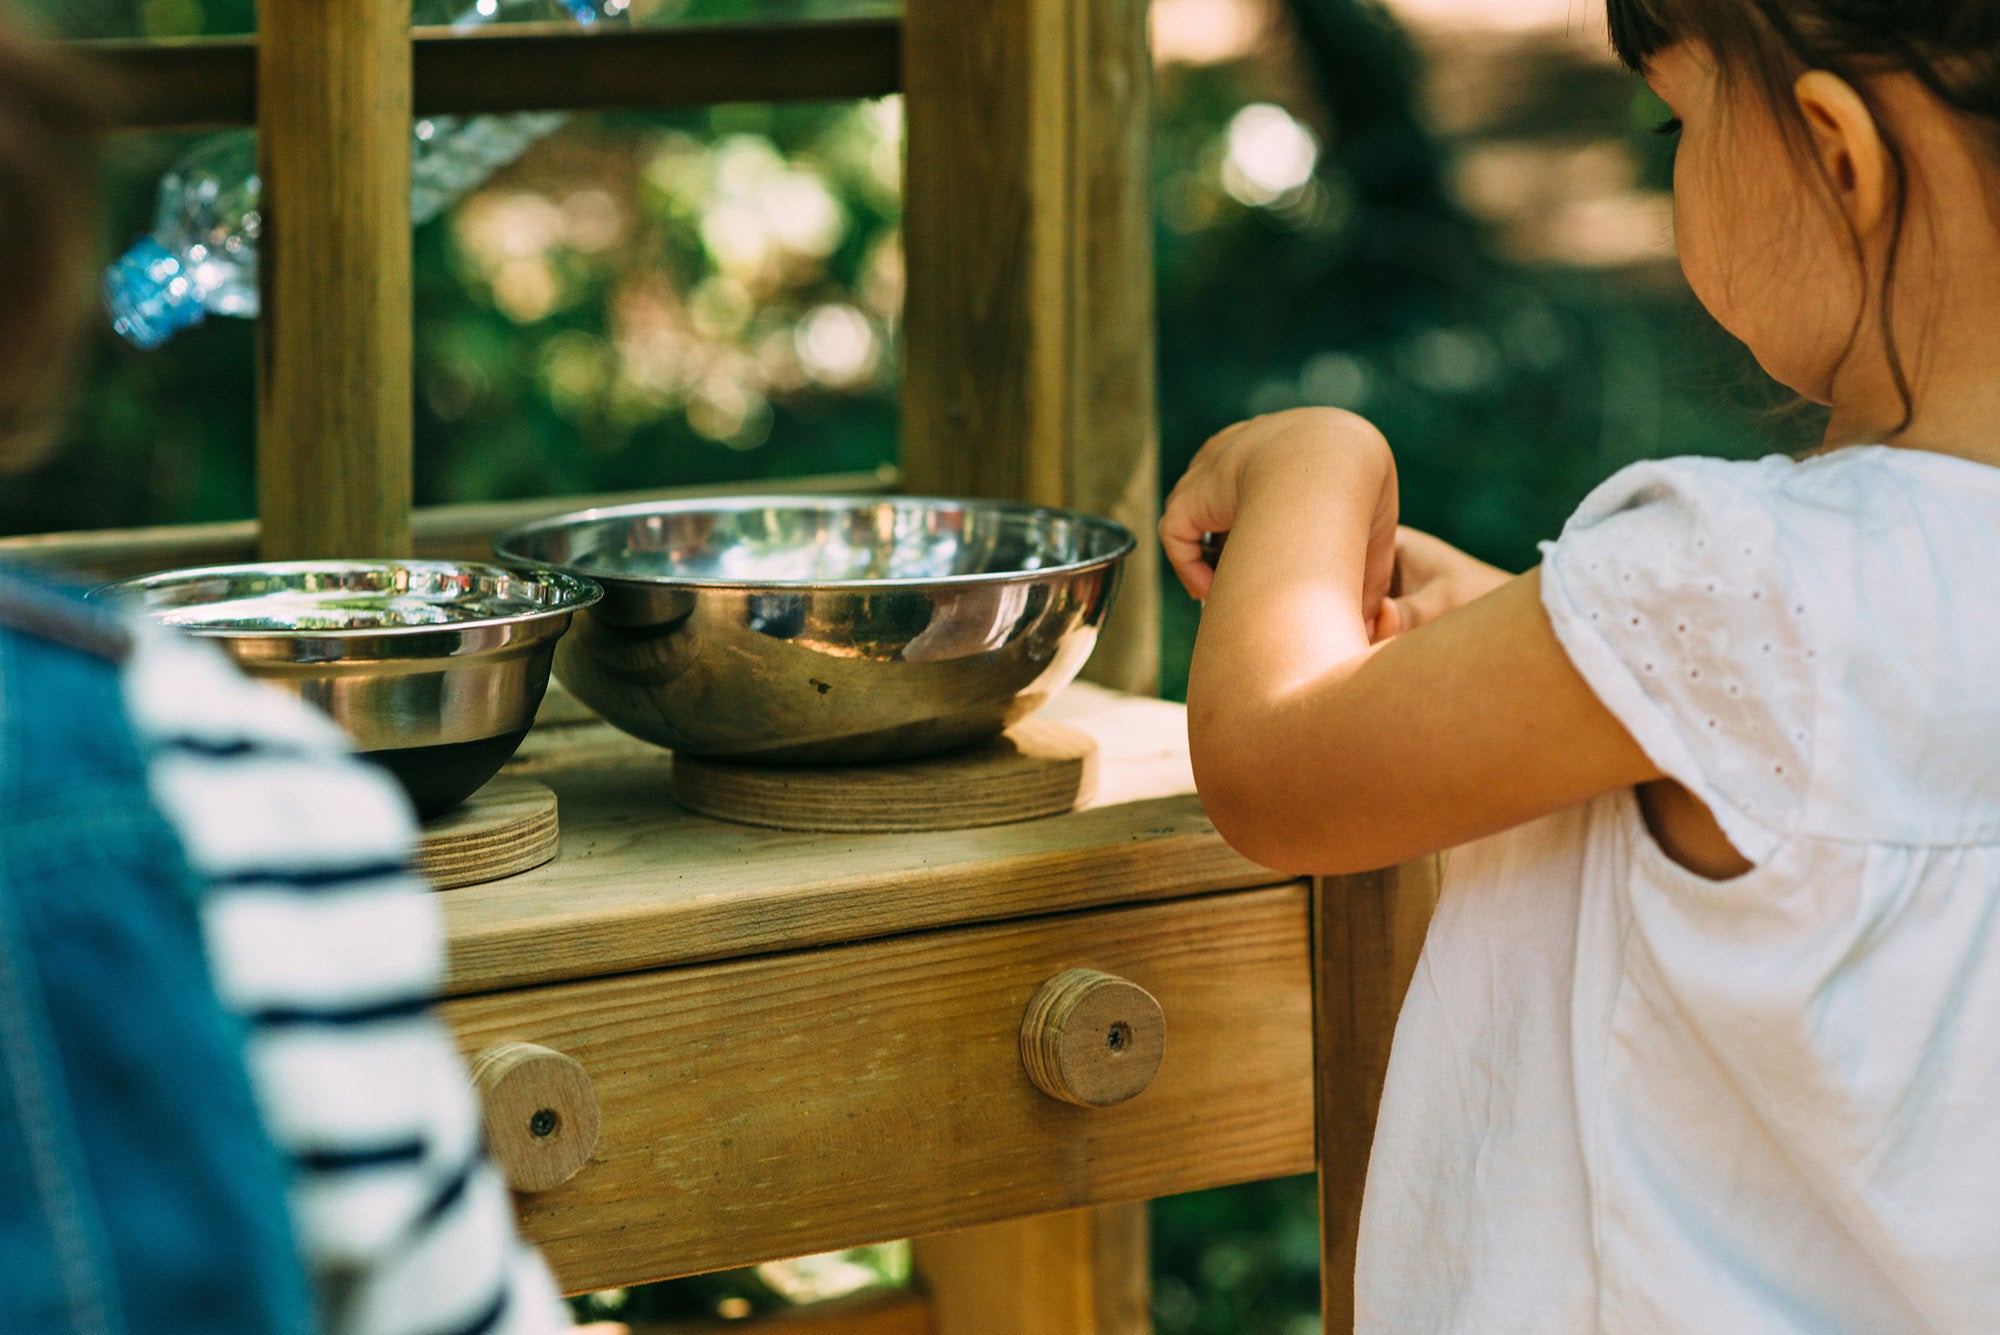 Wooden Outdoor Mud Kitchen with pots and pans